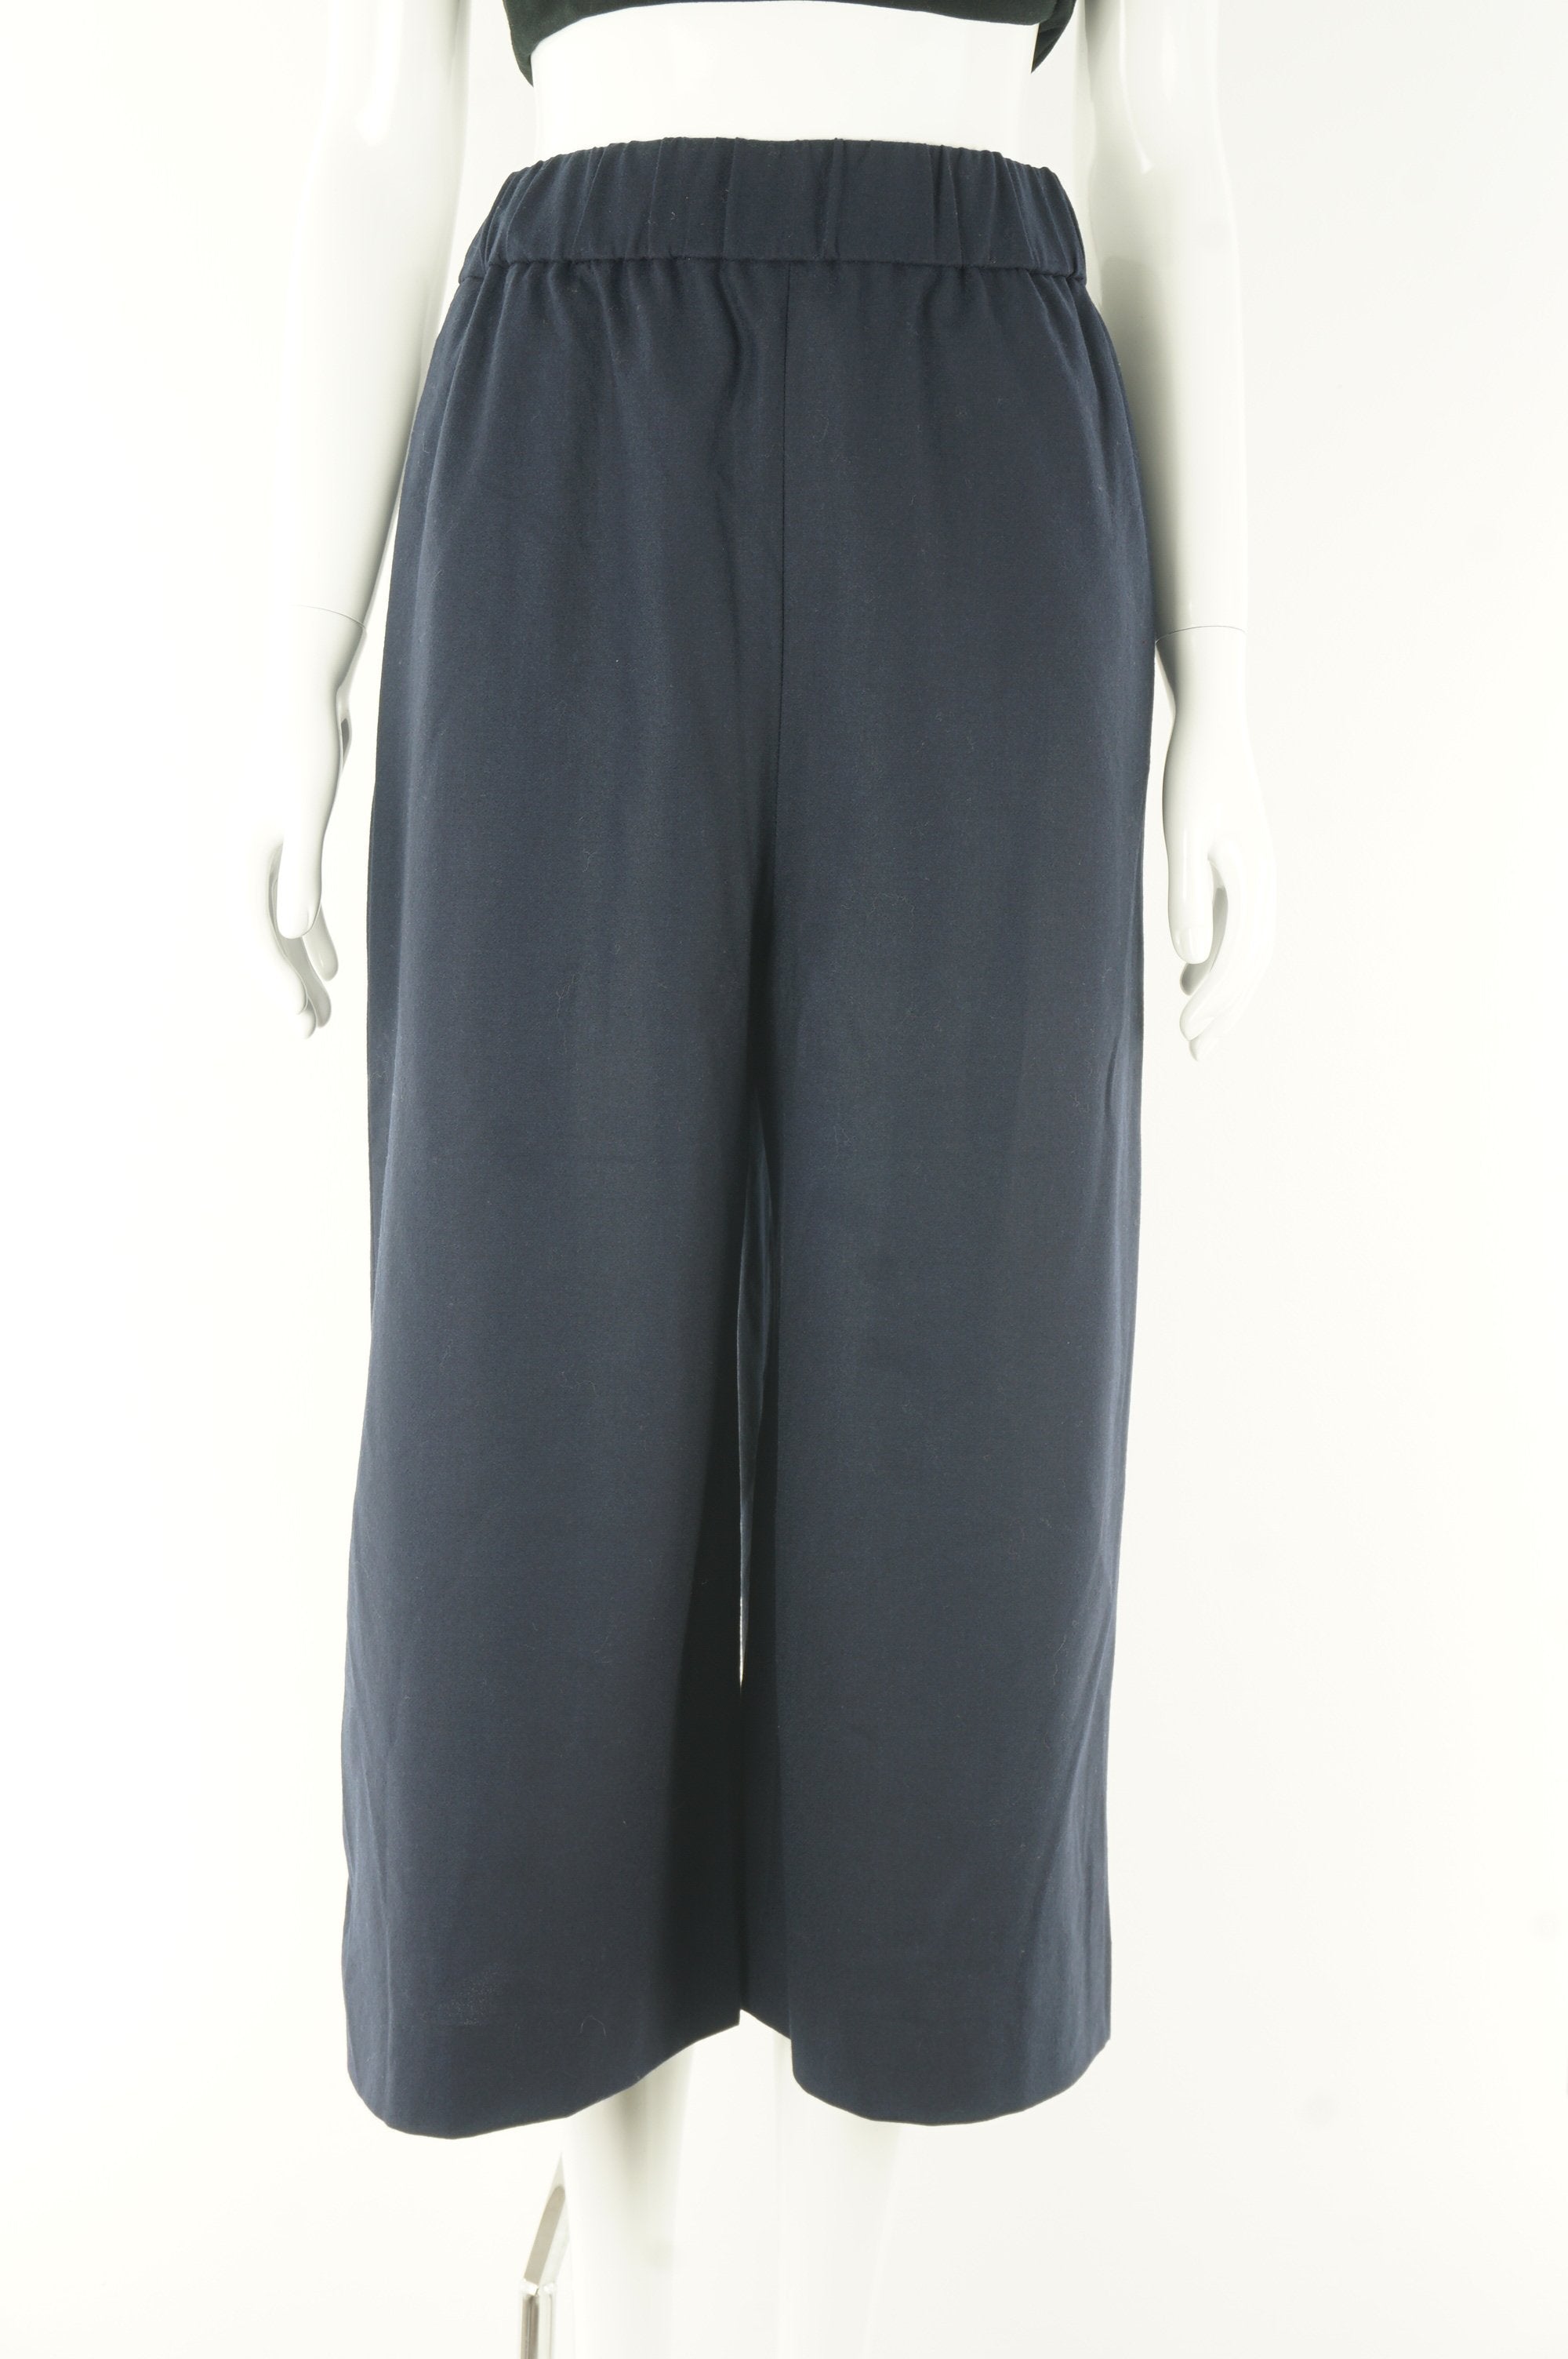 COS Wide Leg Pants With Elastic Waistband, The wide legs and the elastic waist band SCREAMS comfortableness! All natural wool material also guarantees warmth for the winter months., Blue, 96% Wool, 4% Elastane, women's Pants, women's Blue Pants, COS women's Pants, Women's wide legged capri pants, women's wool capri trousers